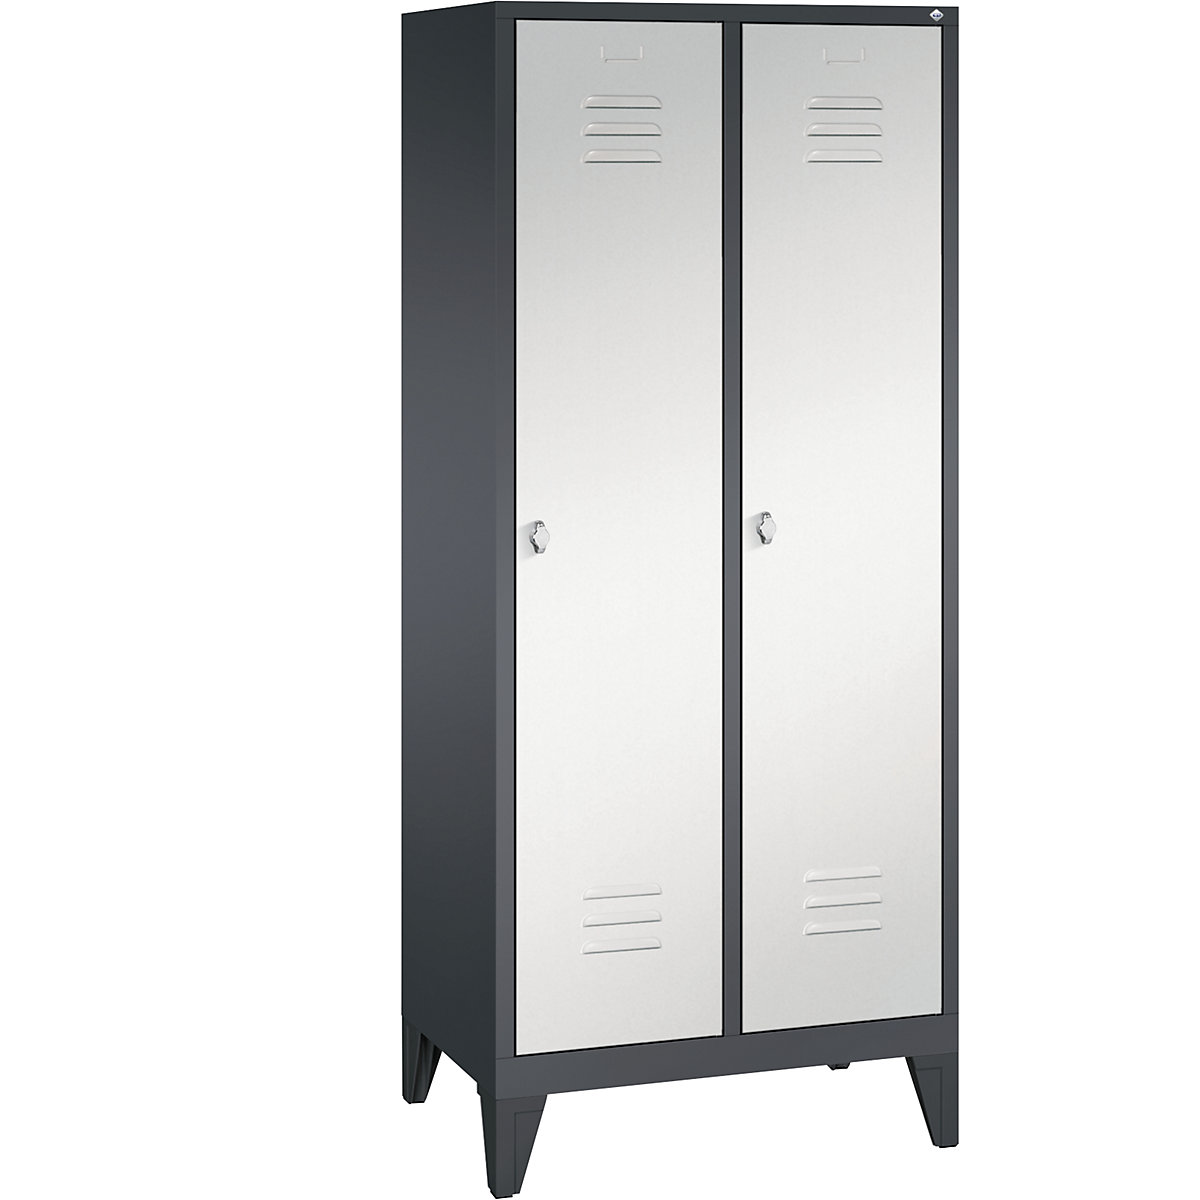 CLASSIC storage cupboard with feet – C+P, 2 compartments, compartment width 400 mm, black grey / light grey-10